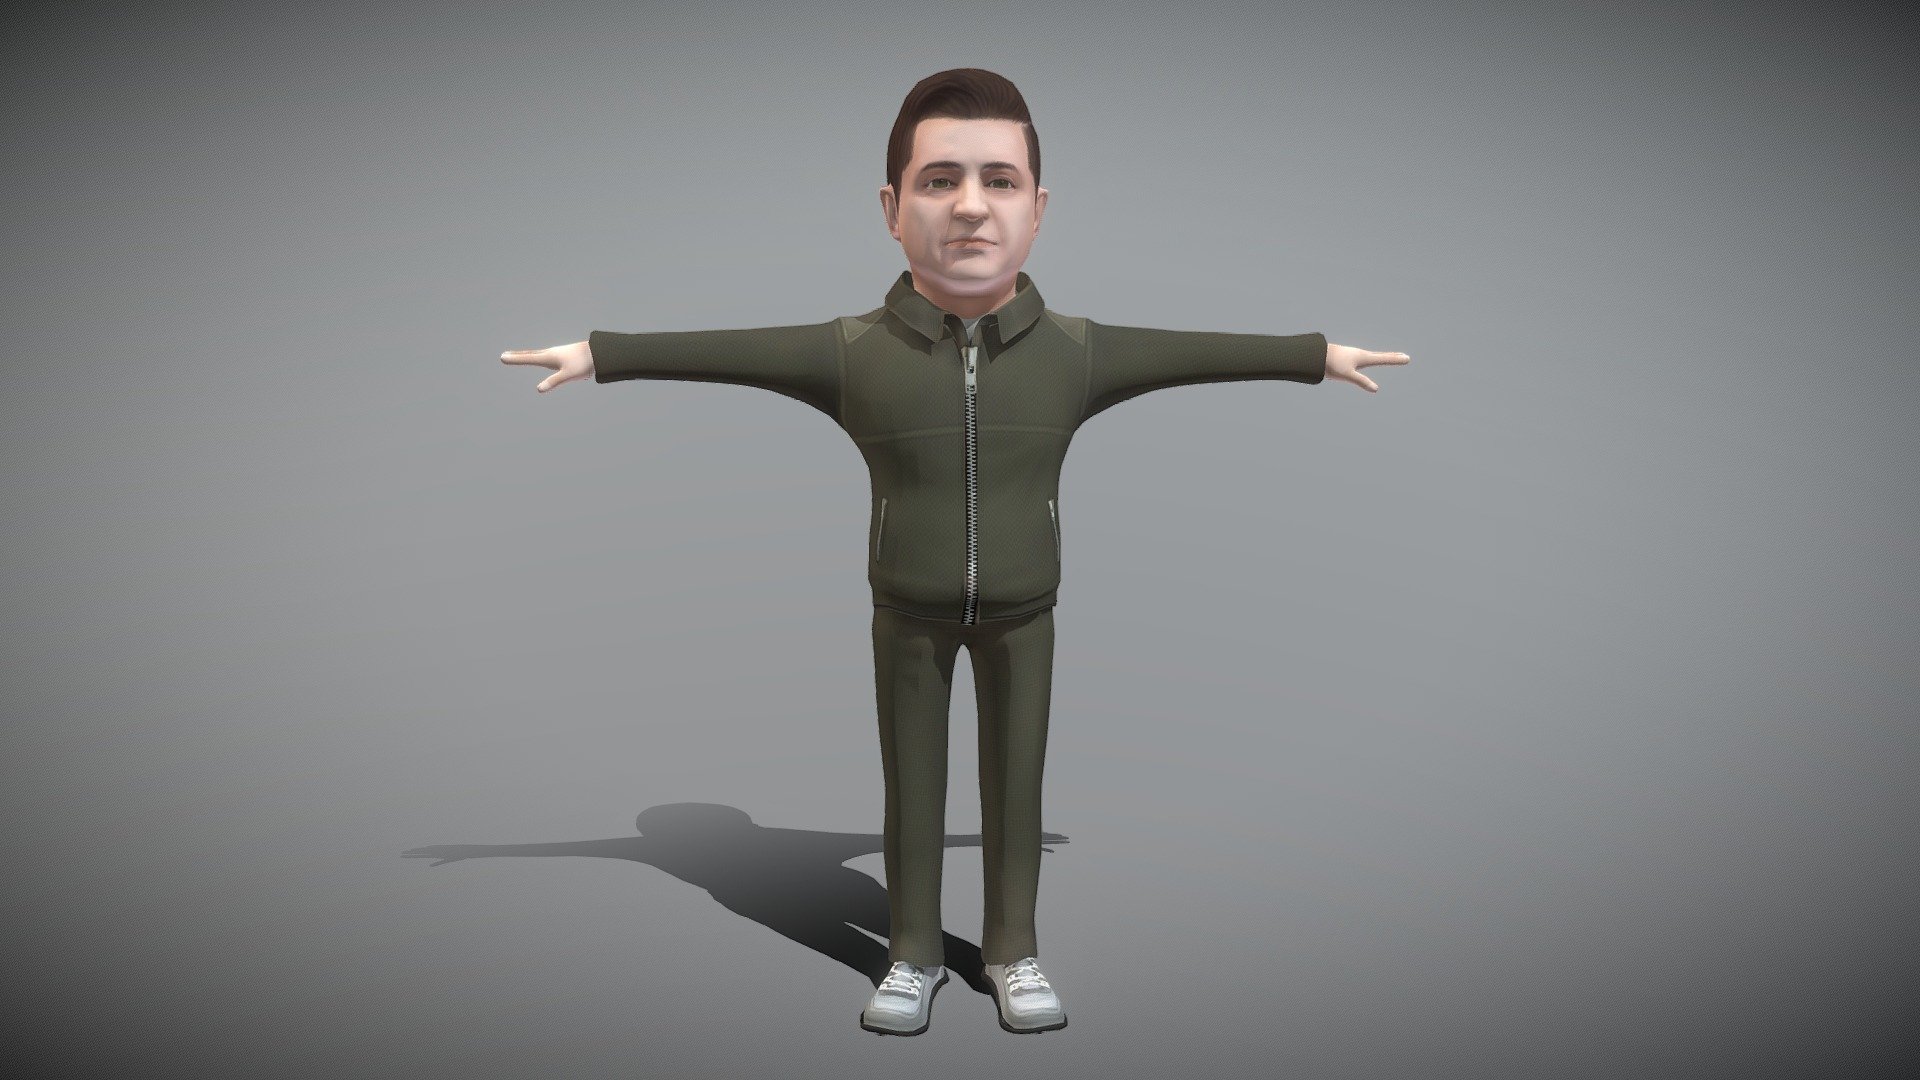 Volodymyr Oleksandrovych Zelenskyy is a Ukrainian politician and former comedian and actor who has served as the sixth and current president of Ukraine since 2019. 

This model contains 10 common character animations such as idle, talking, walking, waving, and runnning. 

If you want this model, please feel free to contact me.

E-mail: sgzxzj13@163.coom - Zelenskyy - 3D model by Jeremy (@jeremyliu48) 3d model